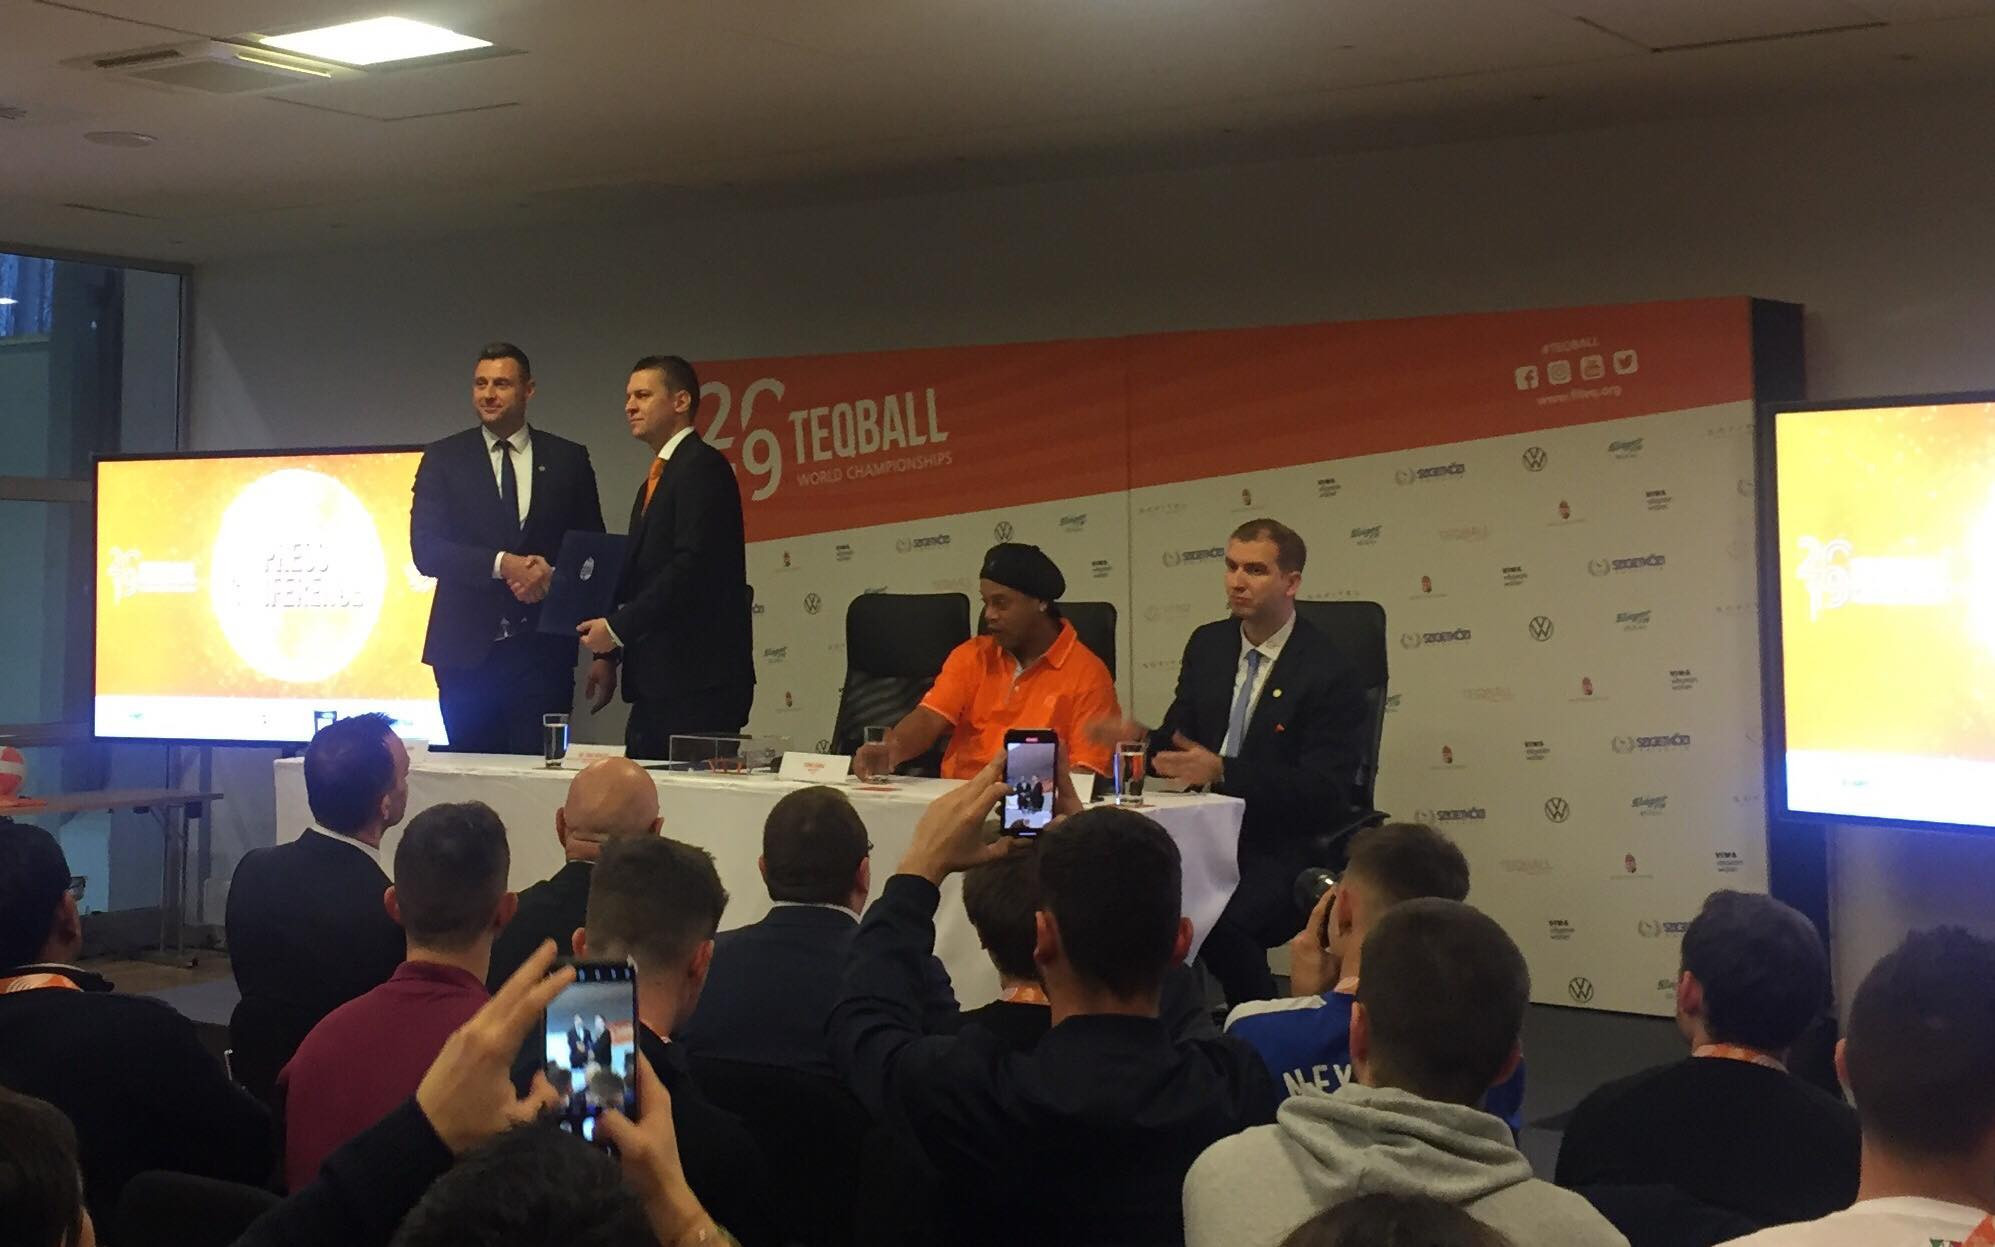 Hungary's Ministry of Foreign Affairs and Trade and the International Teqball Federation signed a strategic cooperation agreement during the press conference ©ITG